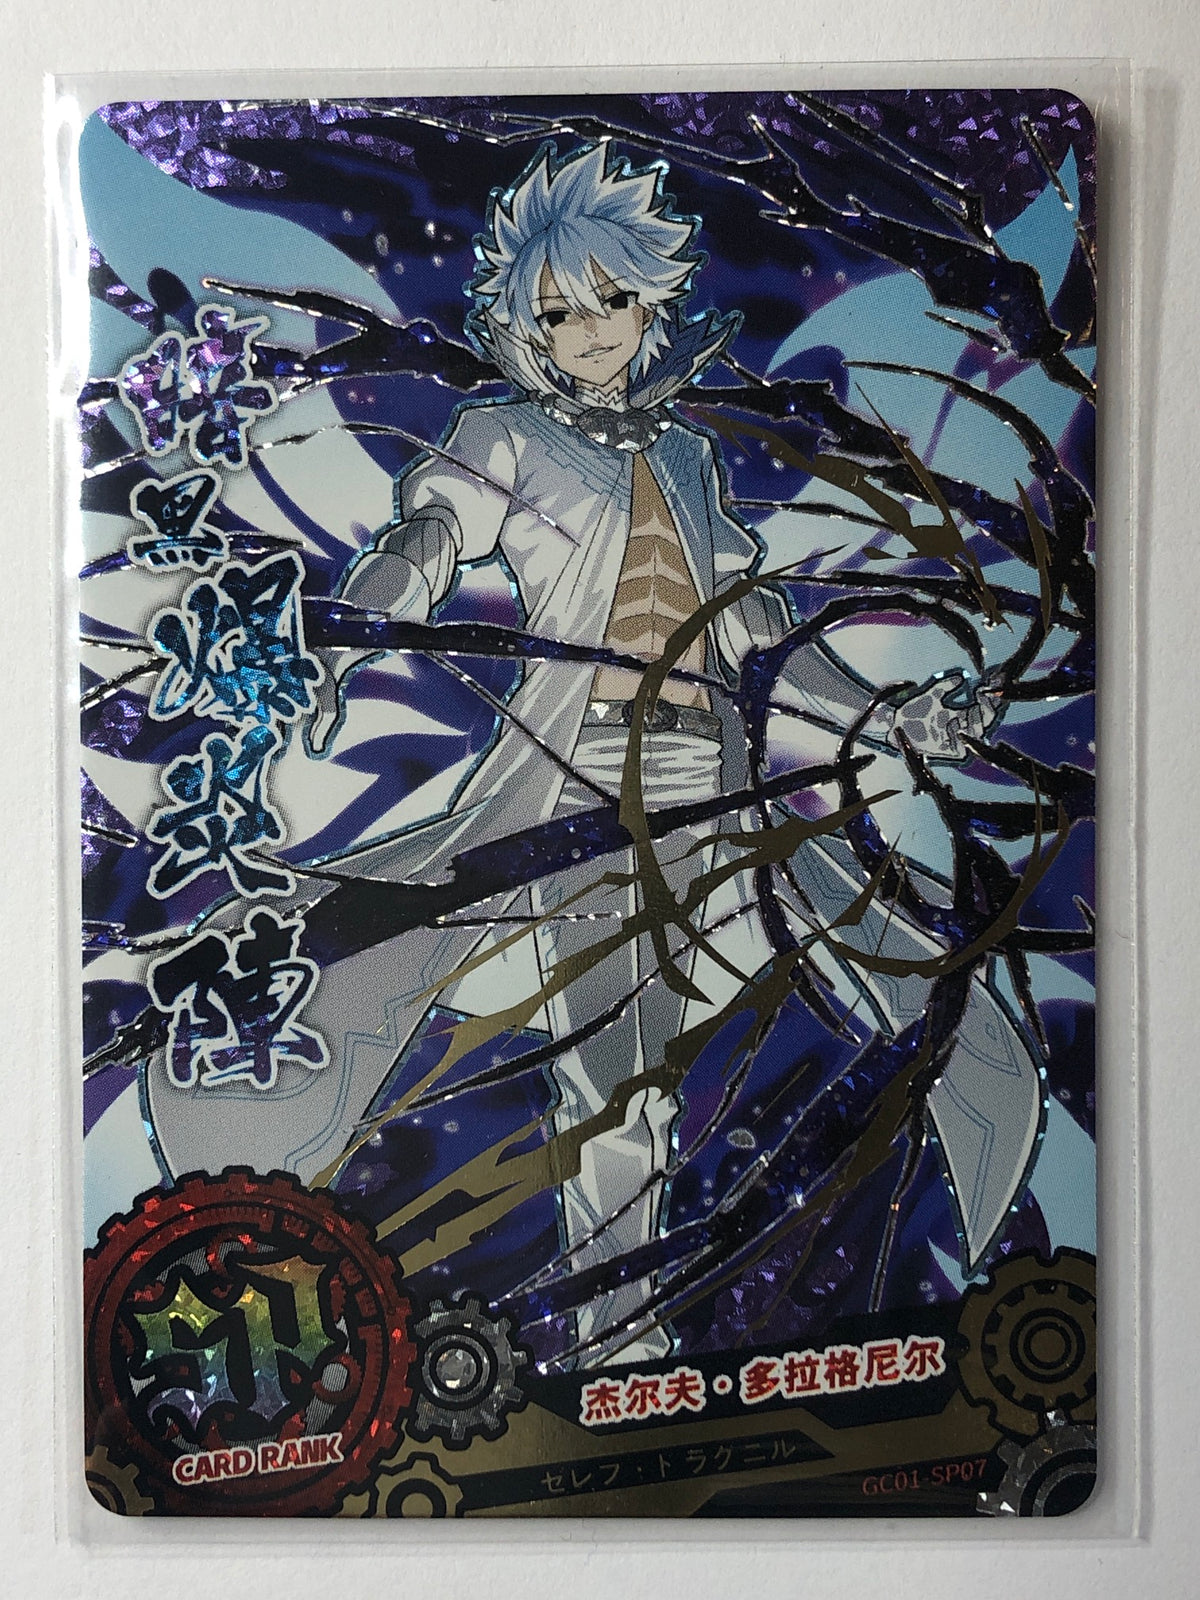 Etherious Zeref Dragneel - COG-GC01-SP07 SP - The Card of God GC01 (M/NM)